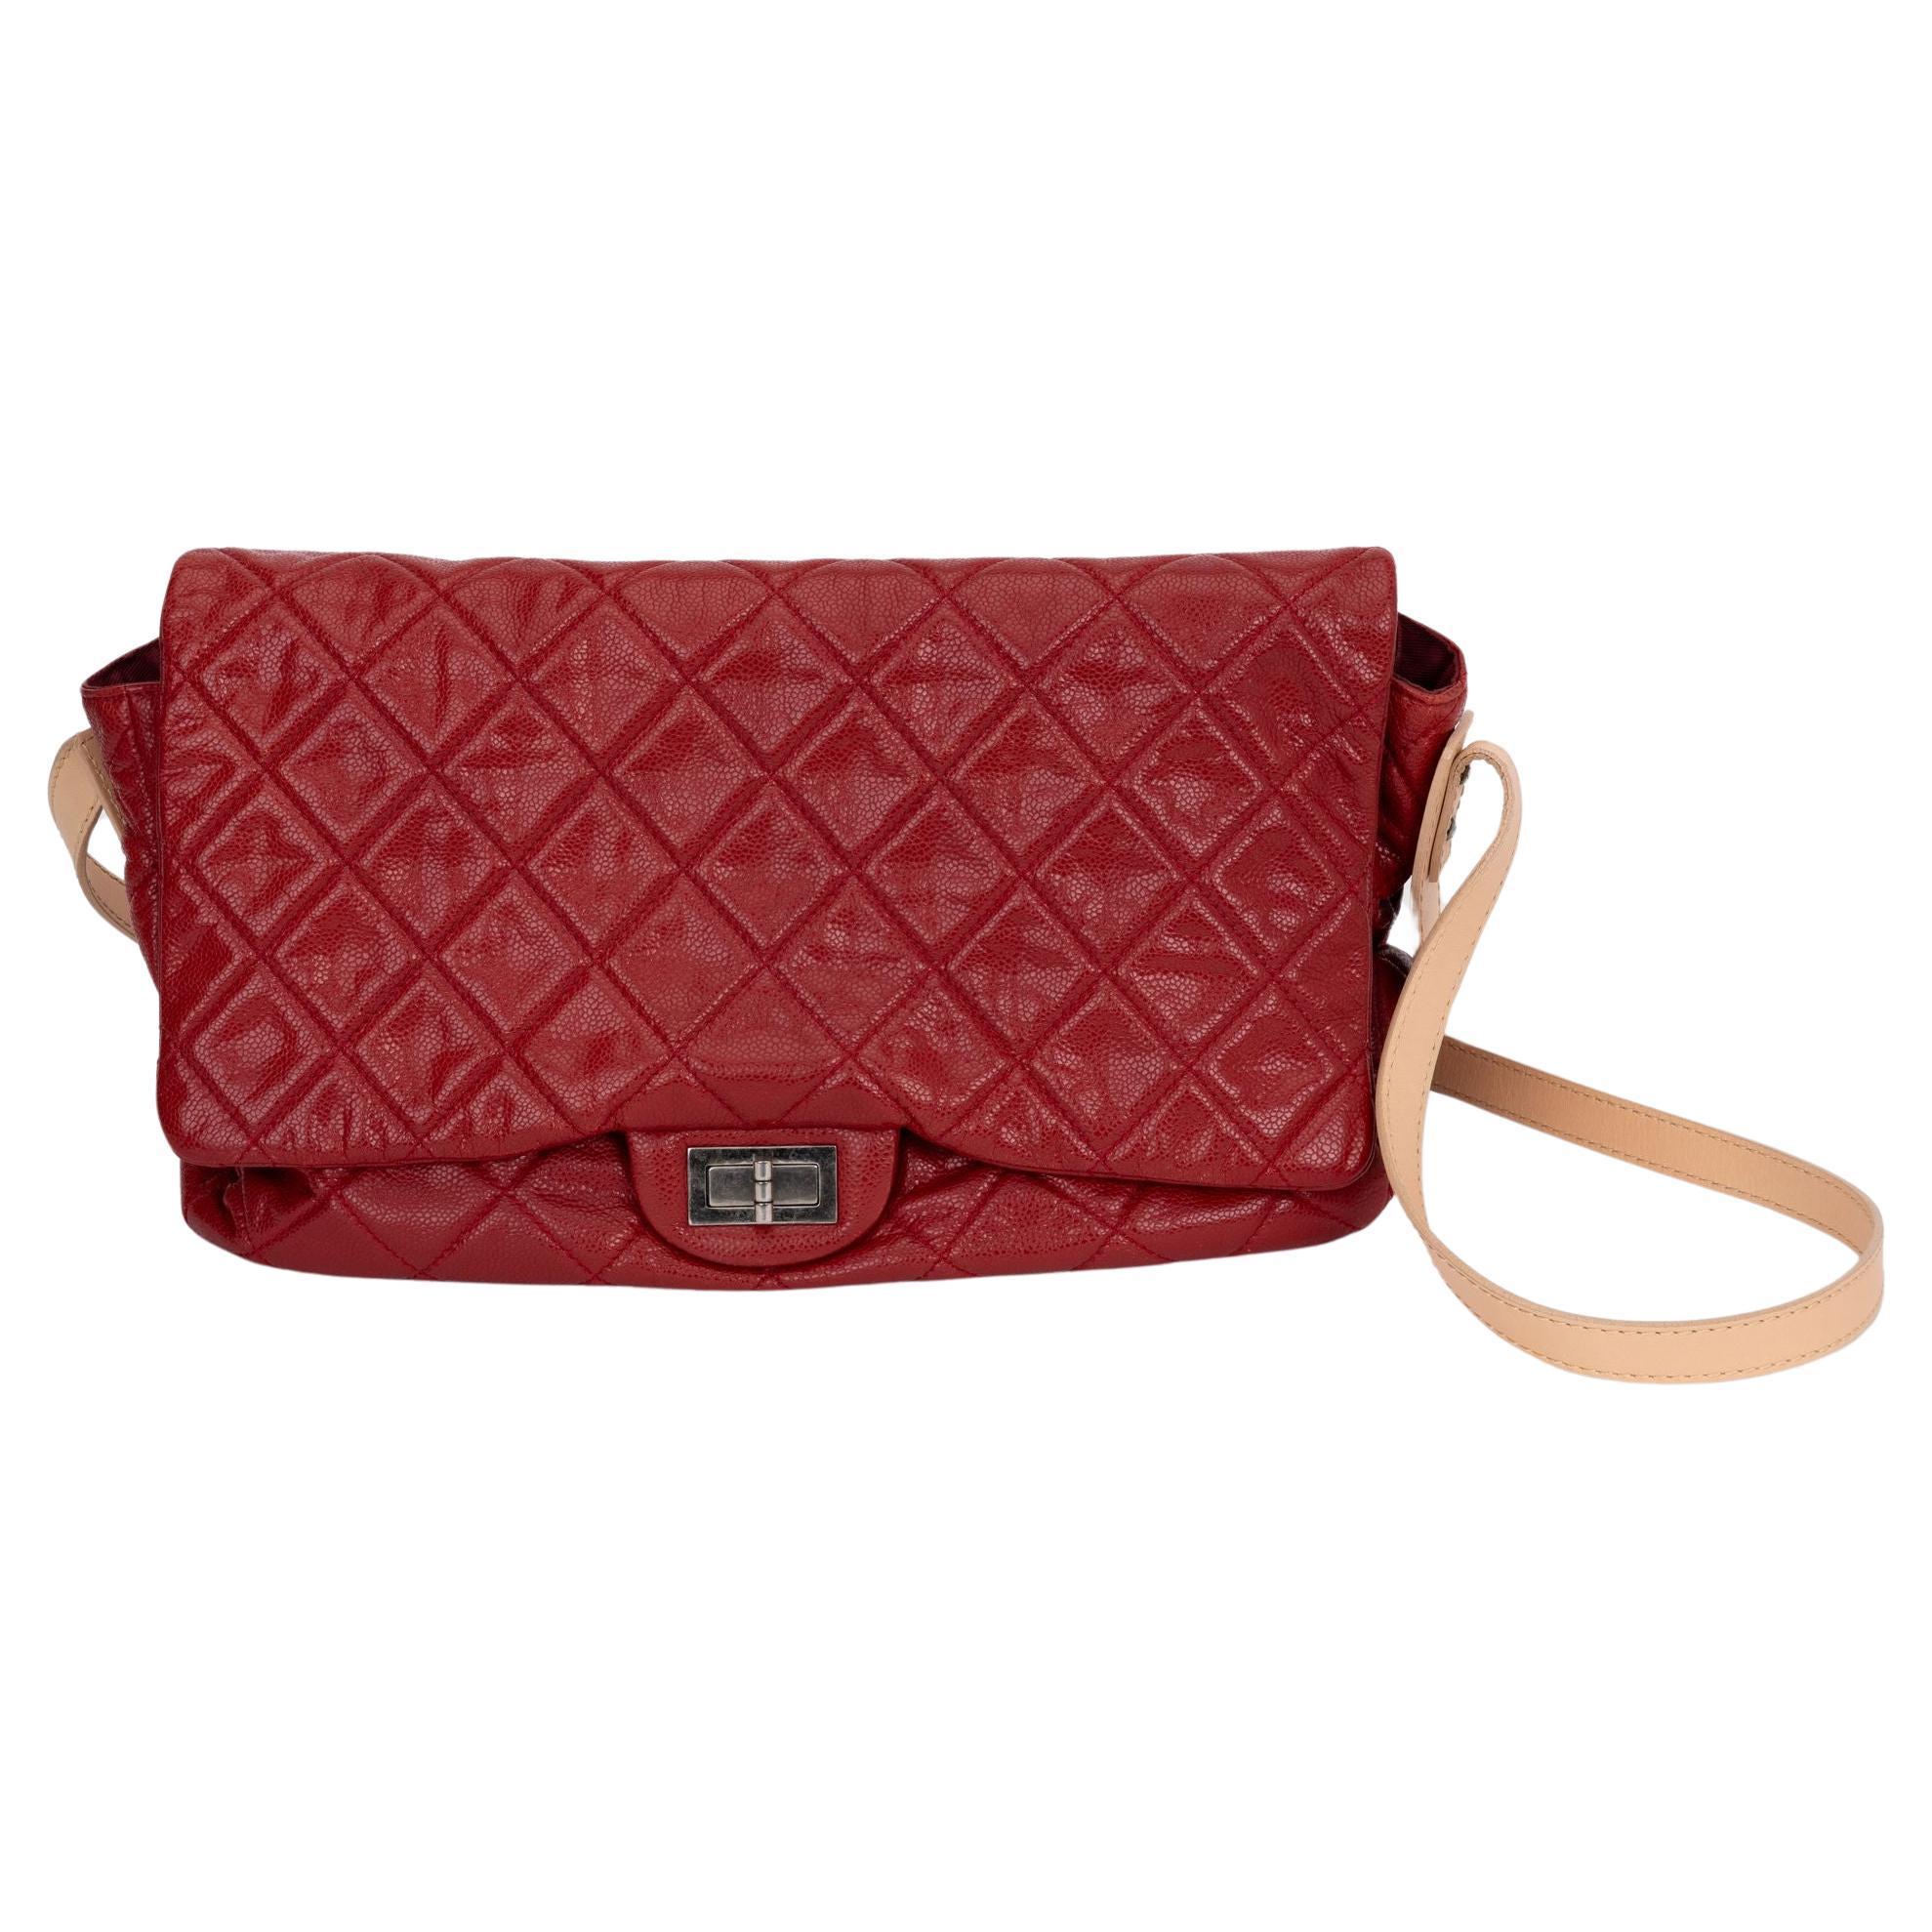 Chanel Red Caviar Reissue Cross Body Bag For Sale